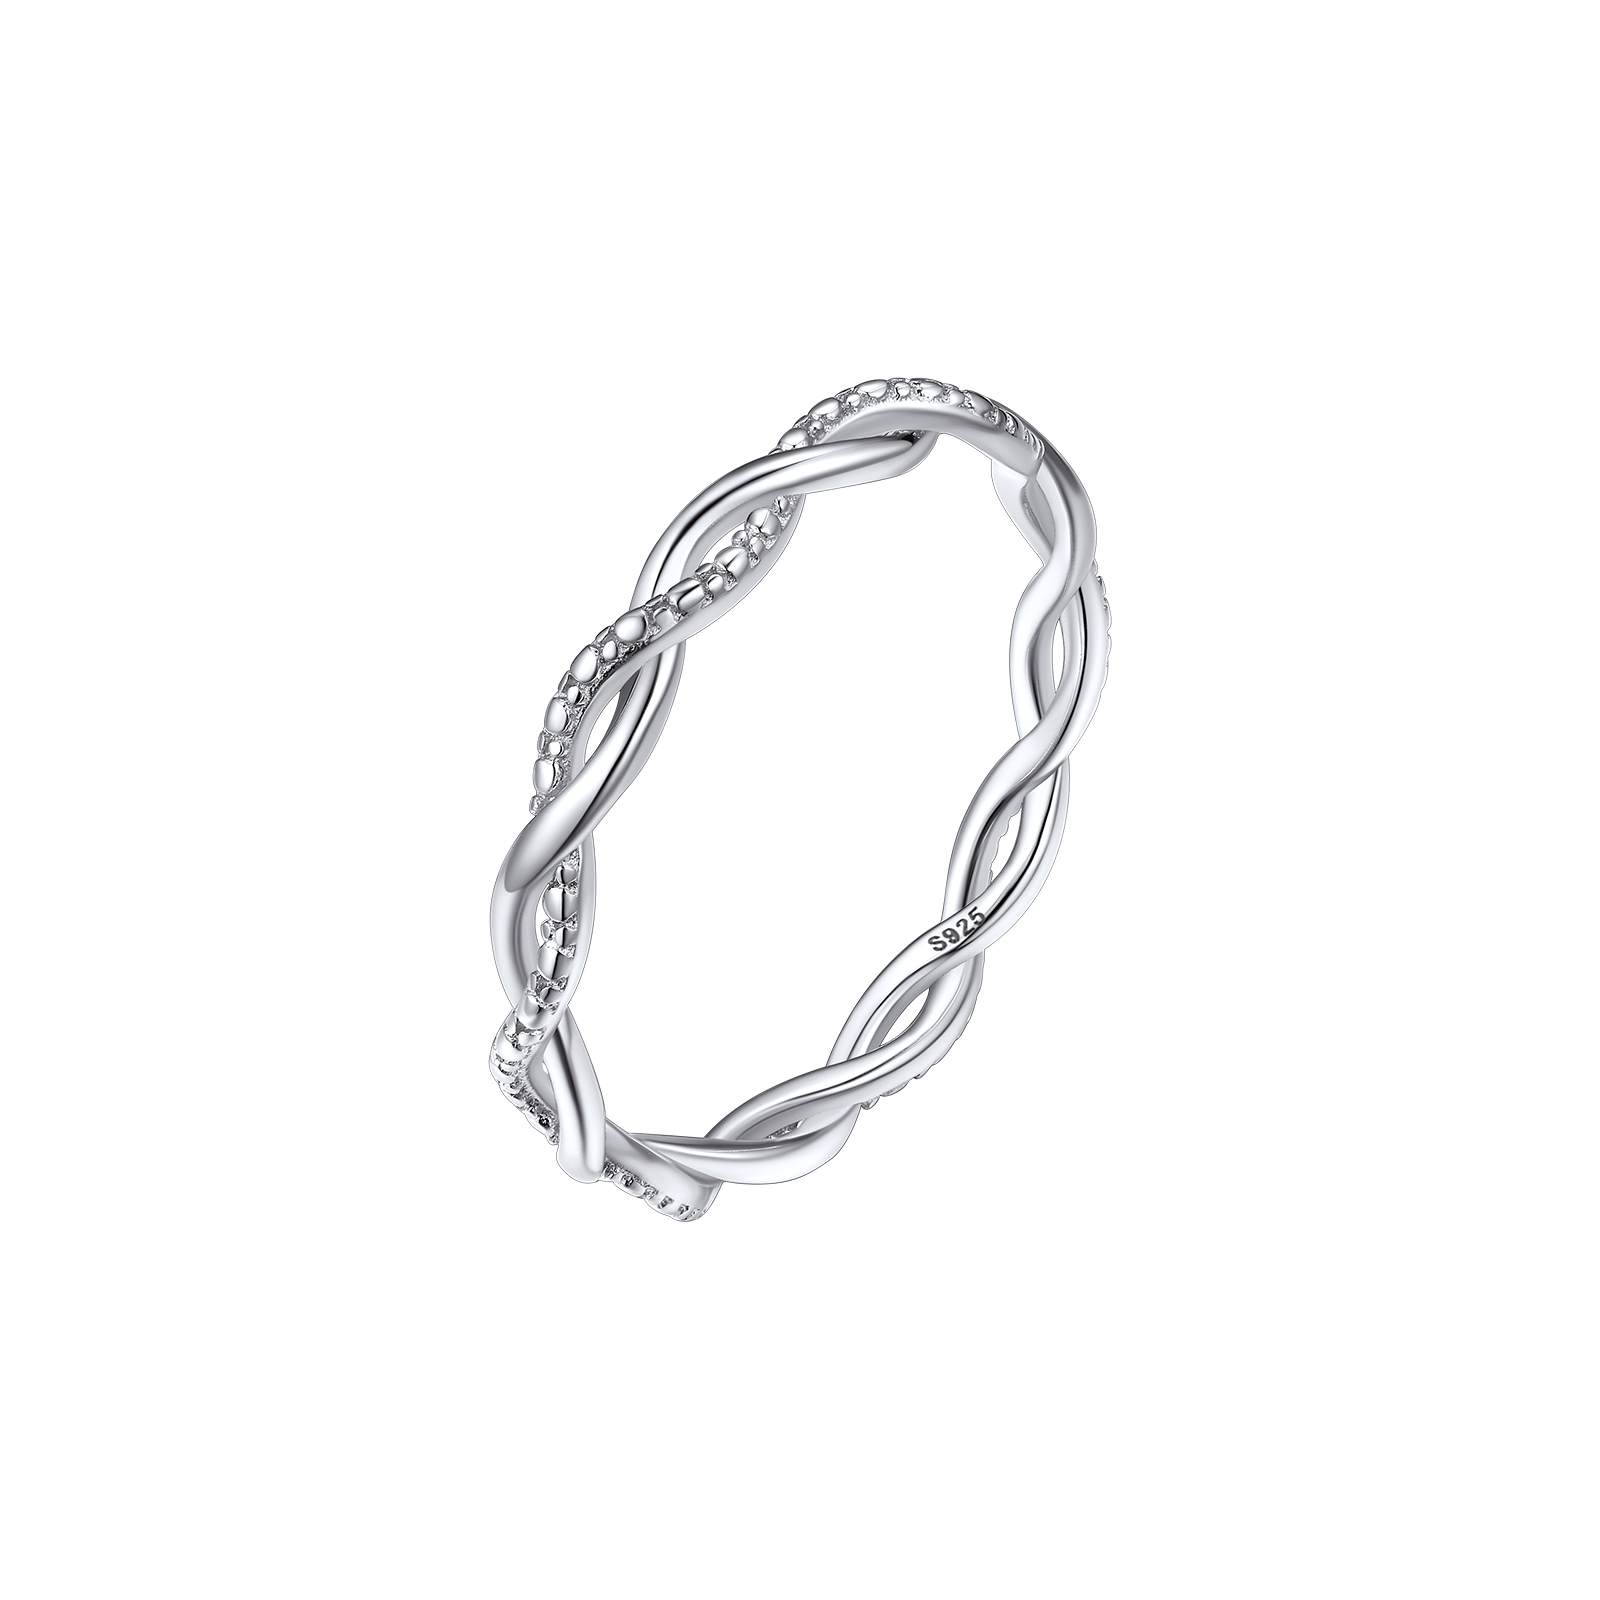 ChicSilver Dainty Twisted Eternity Rope Ring For Women